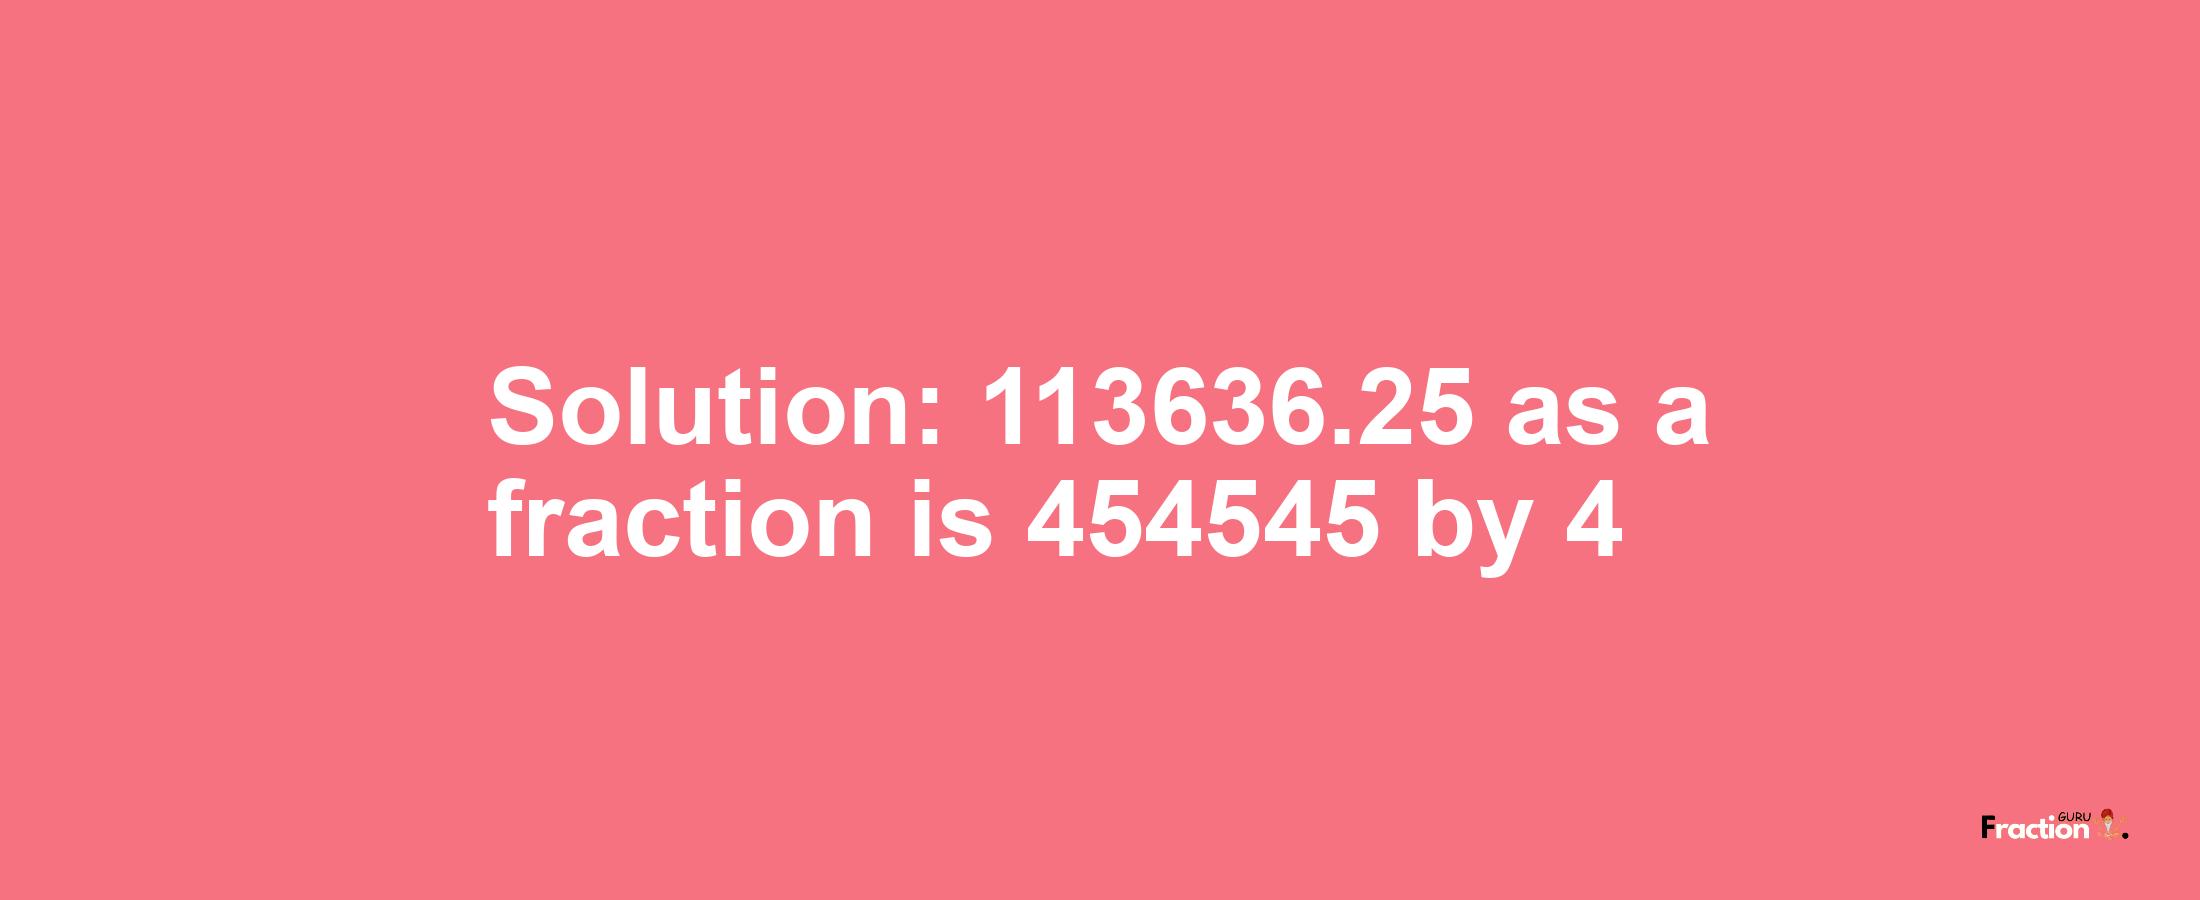 Solution:113636.25 as a fraction is 454545/4